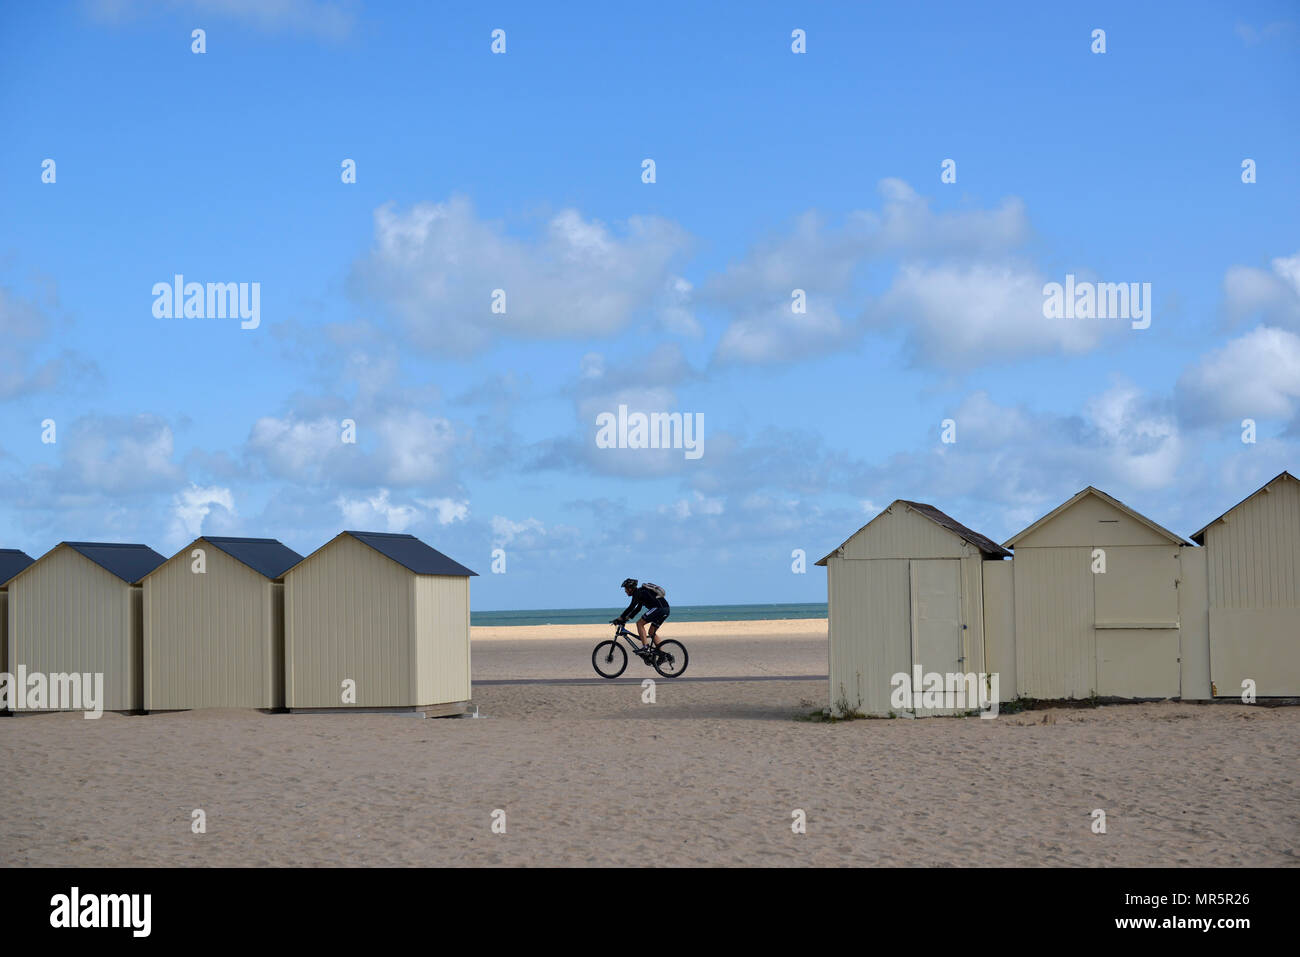 Ouistreham (Normandy, north-western France): man cycling on the beach and beach houses Stock Photo